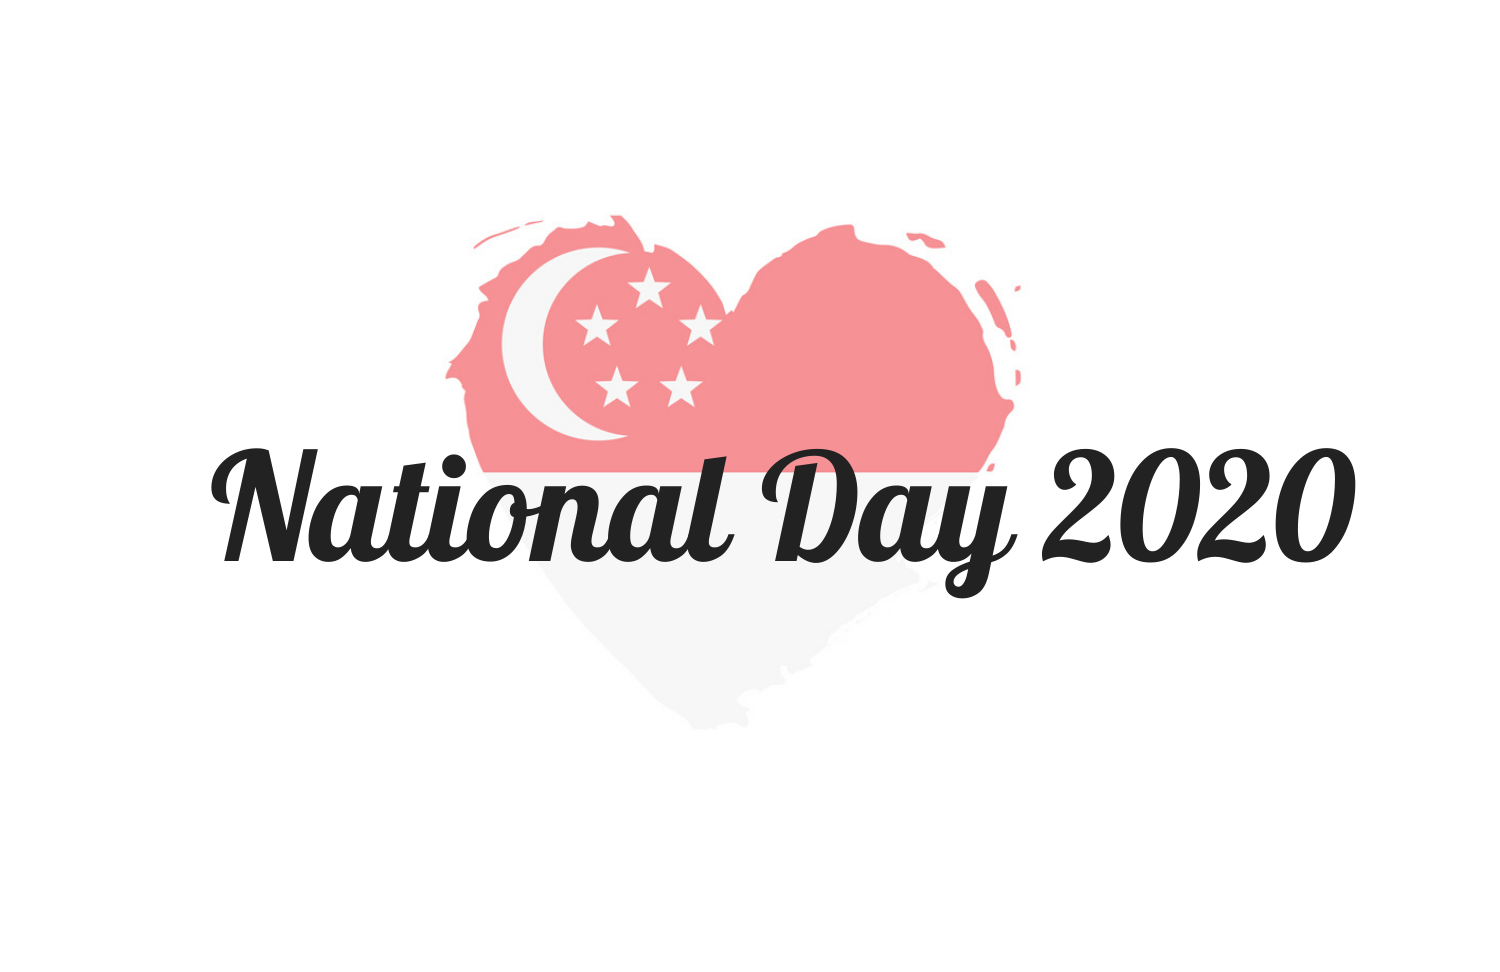 National Day 2020